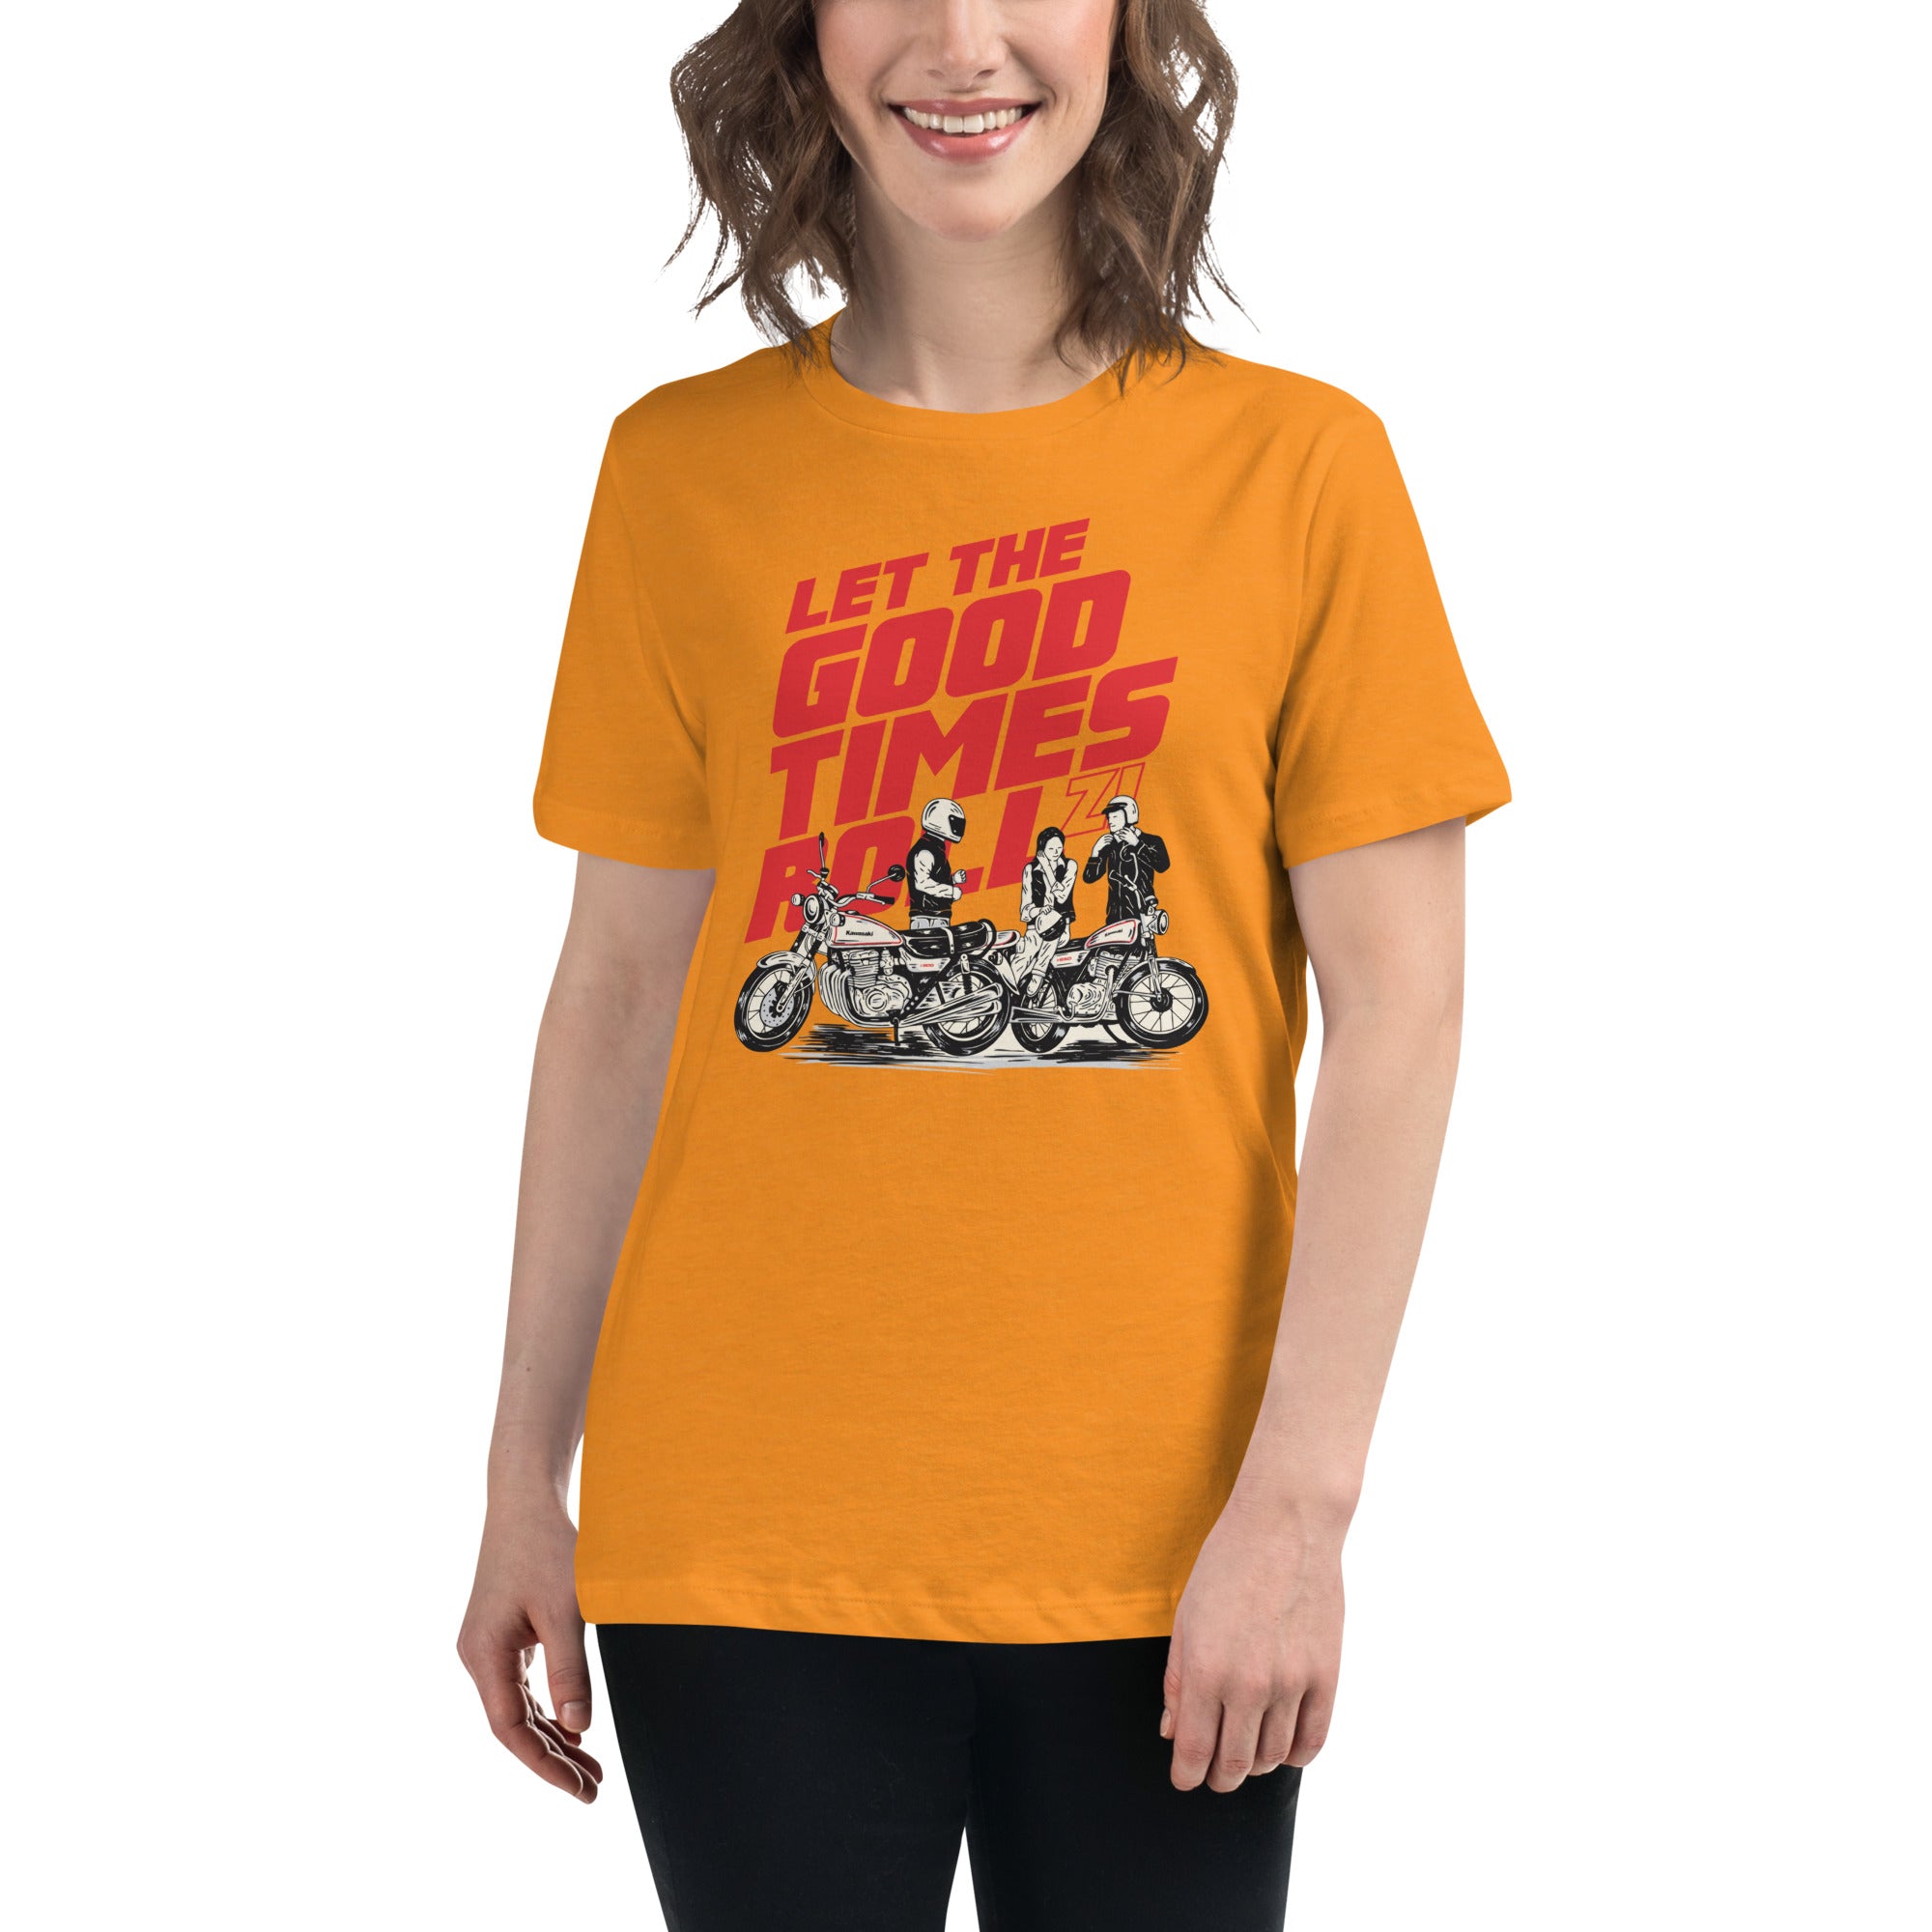 Let The Good Times Roll T-Shirt - Women's